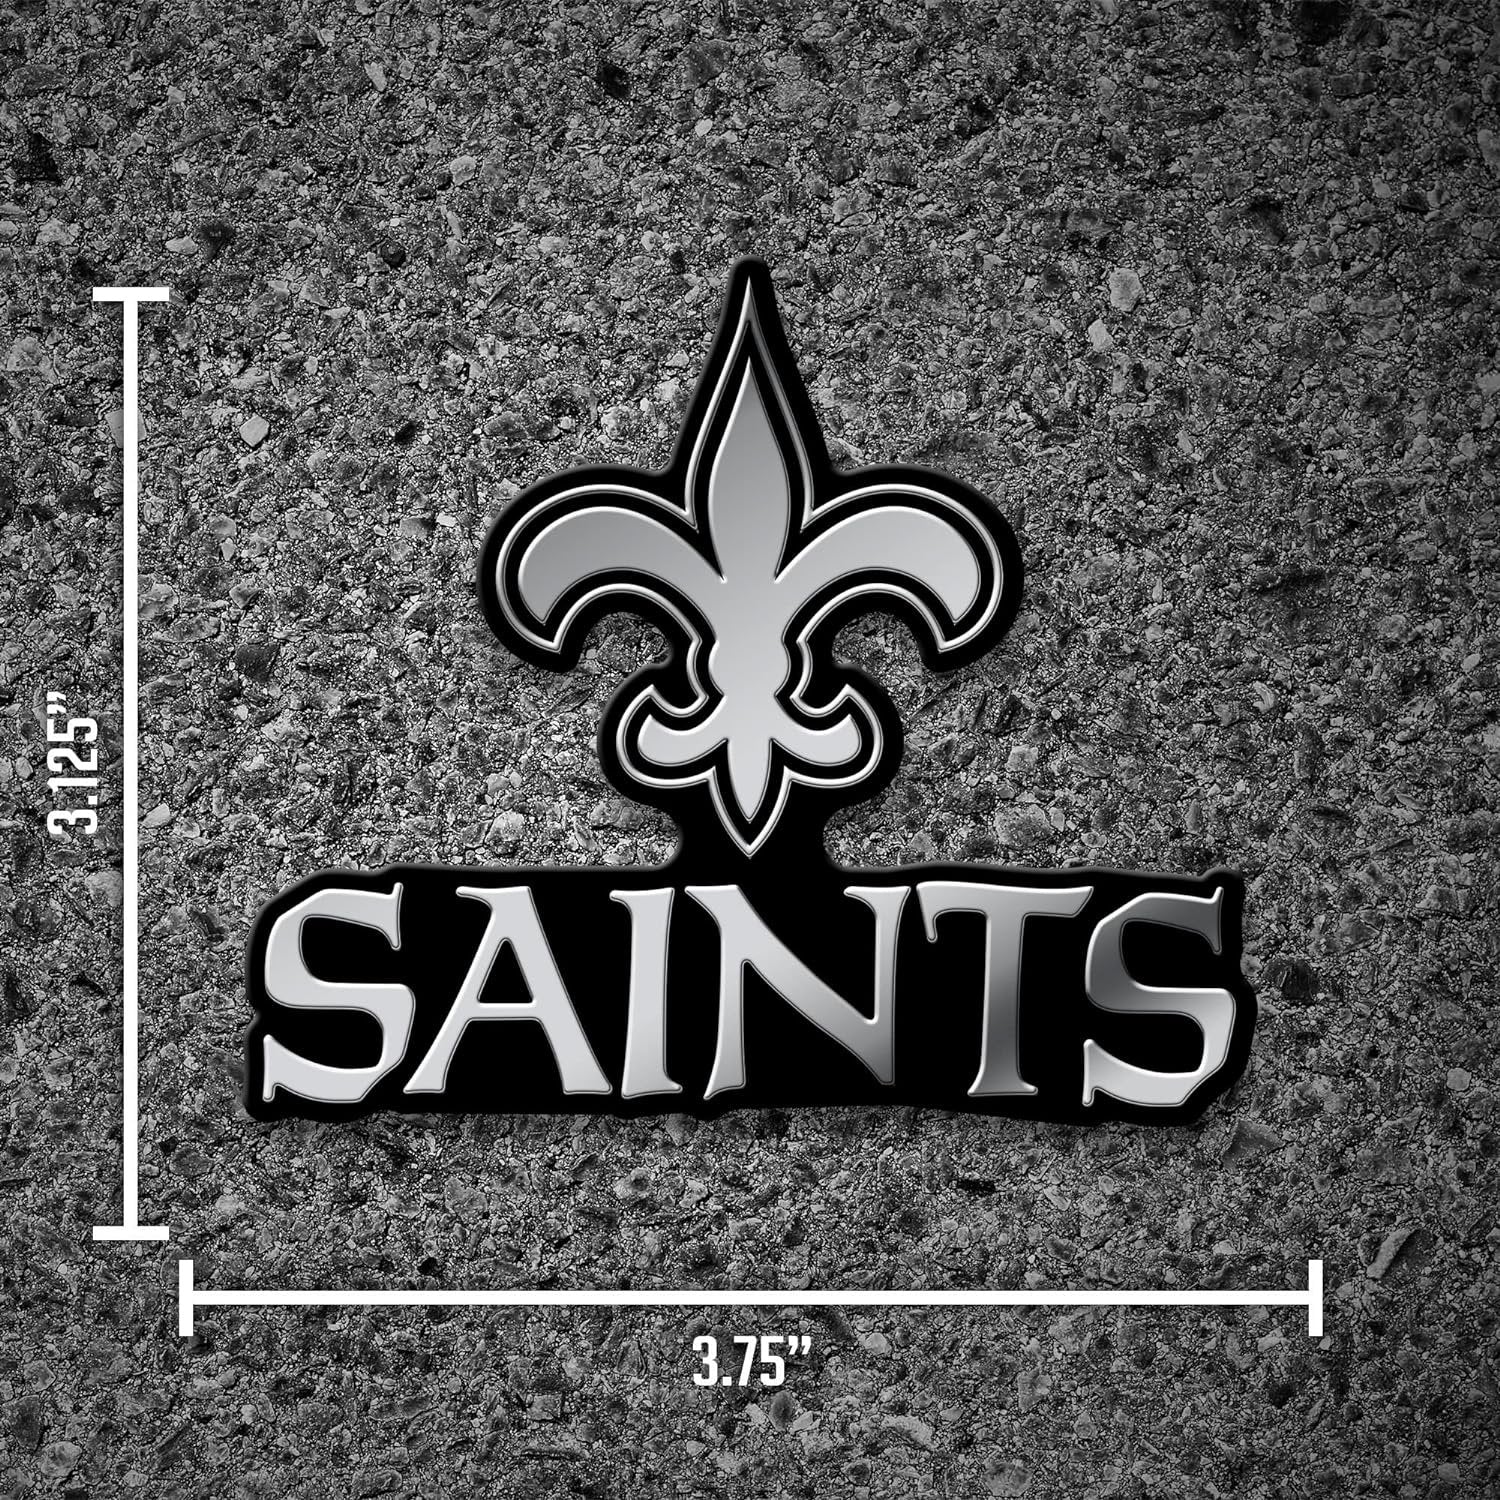 New Orleans Saints Auto Emblem, Silver Chrome Color, Raised Molded Plastic, 3.5 Inch, Adhesive Tape Backing